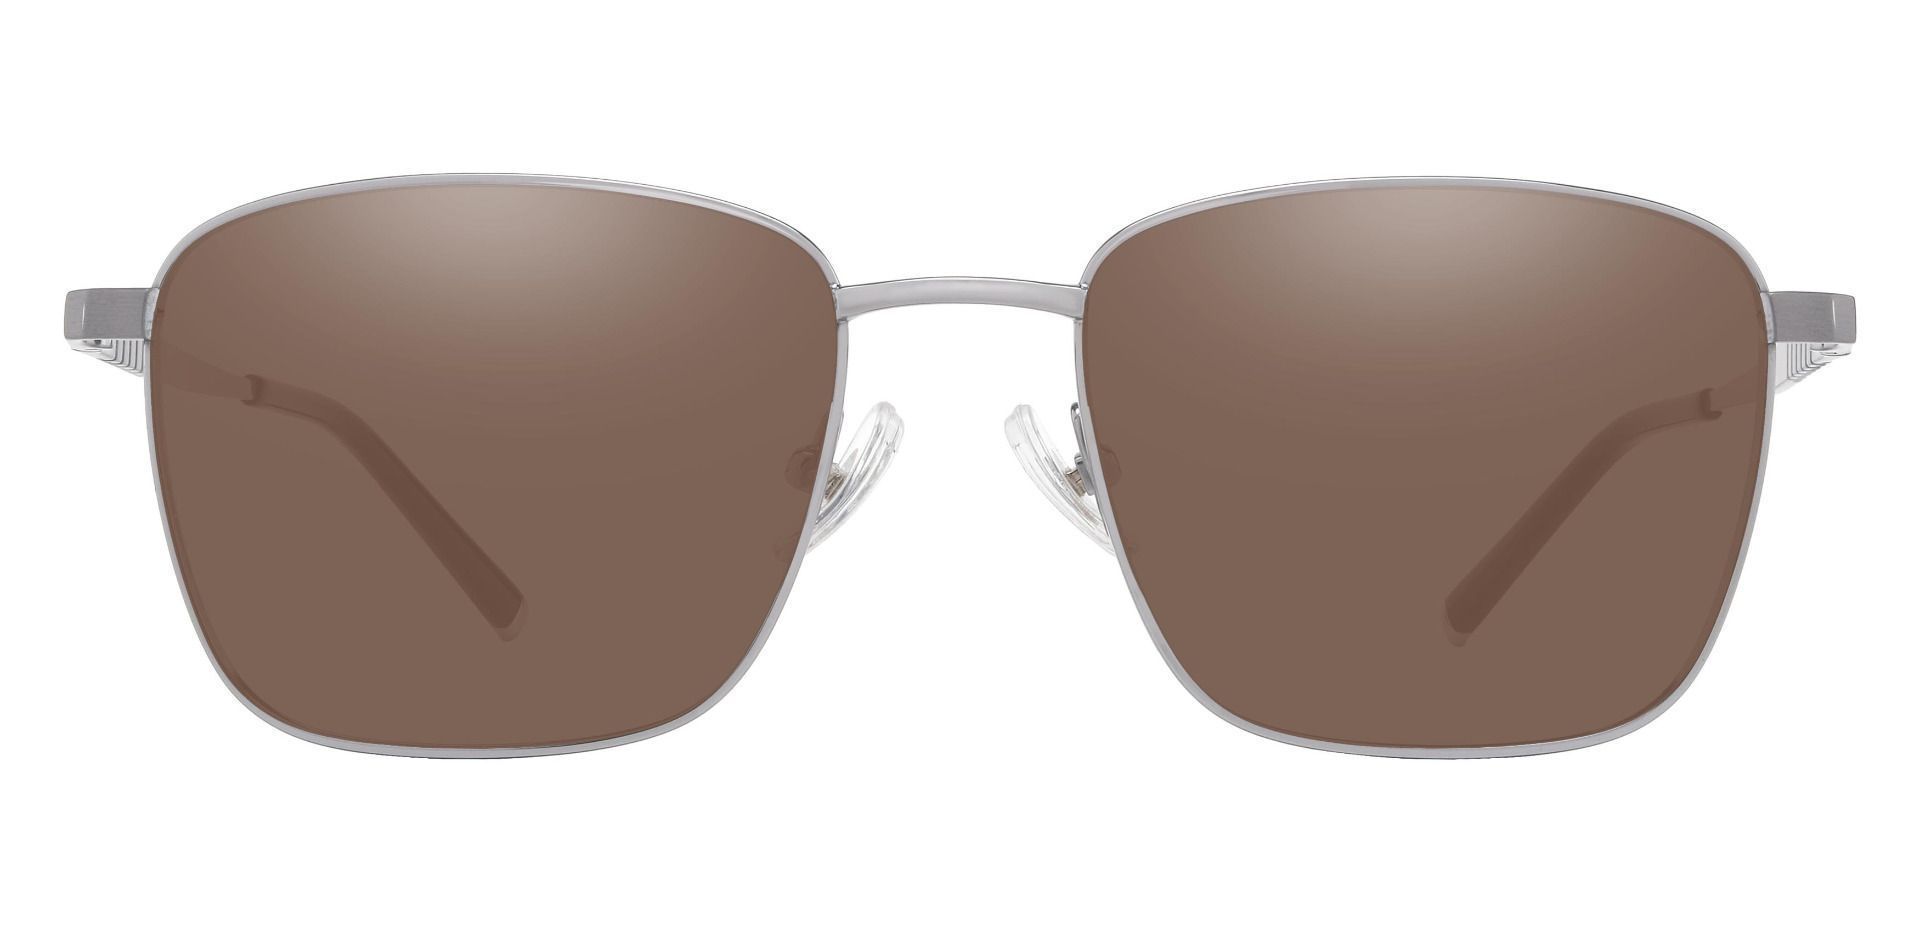 May Square Lined Bifocal Sunglasses - Silver Frame With Brown Lenses